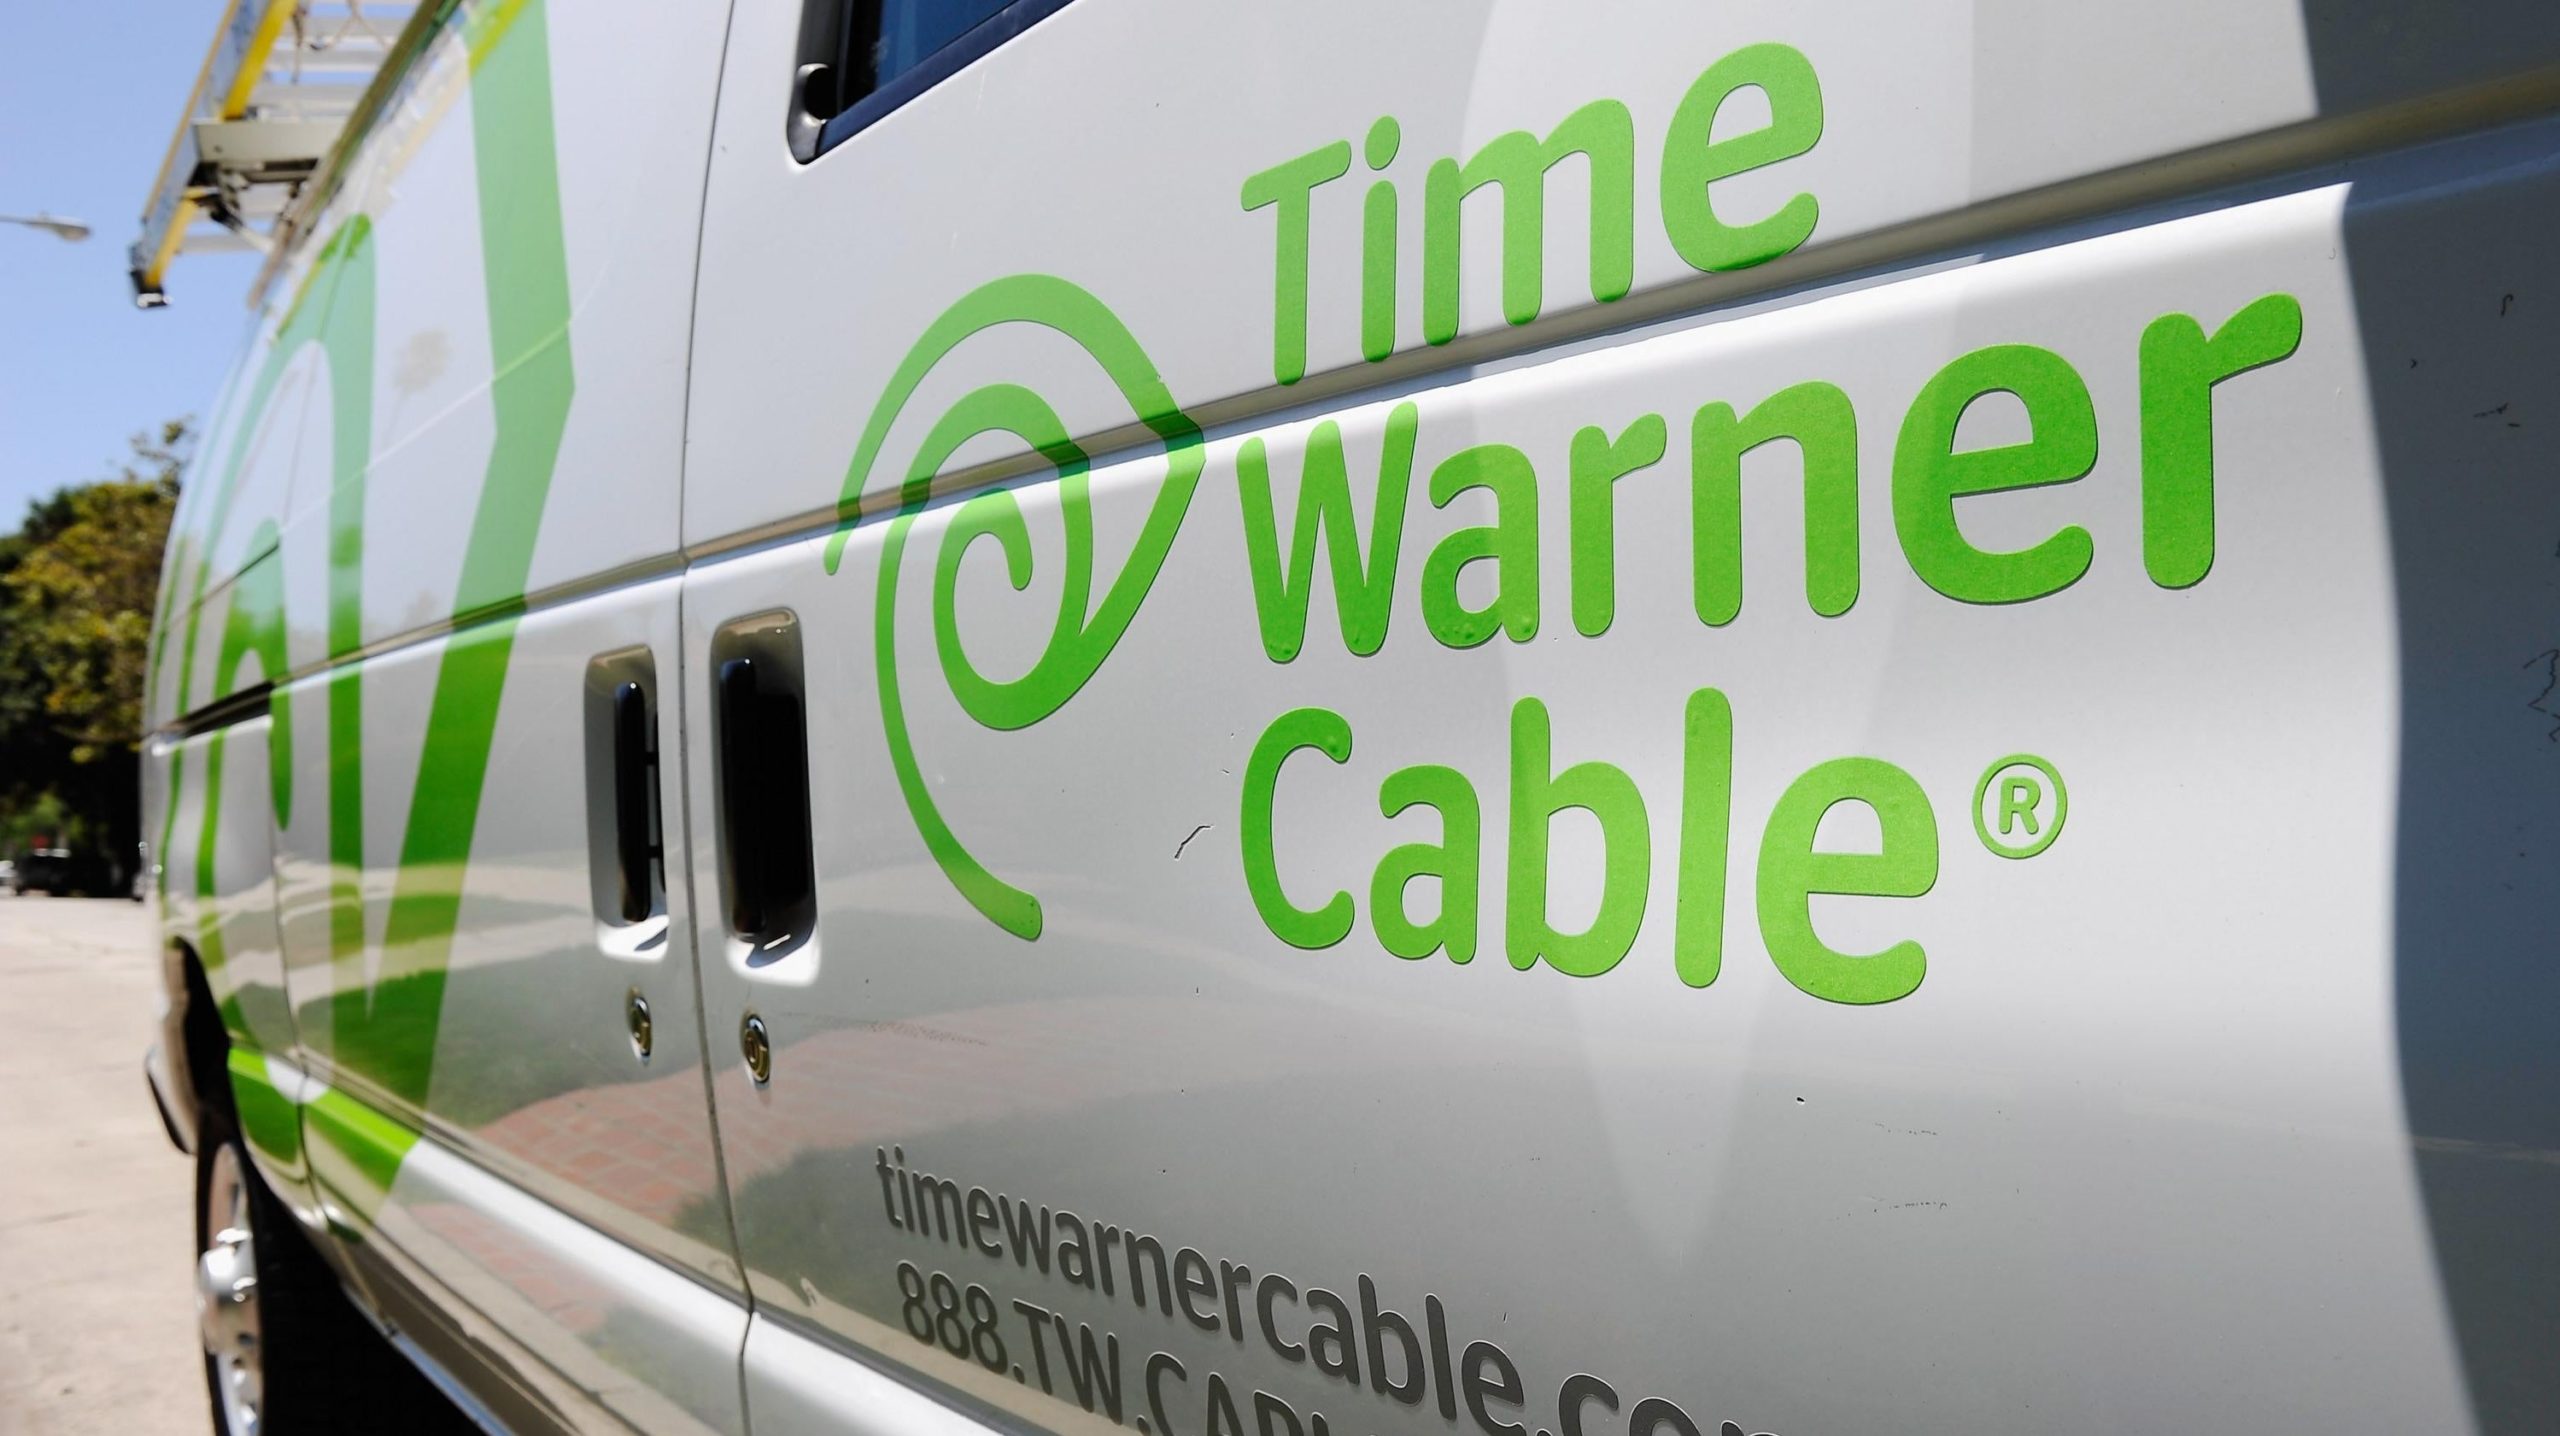 A Time Warner Cable van is parked on the street on August 3, 2011 in Los Angeles, California. (Photo: Kevork Djansezian, Getty Images)